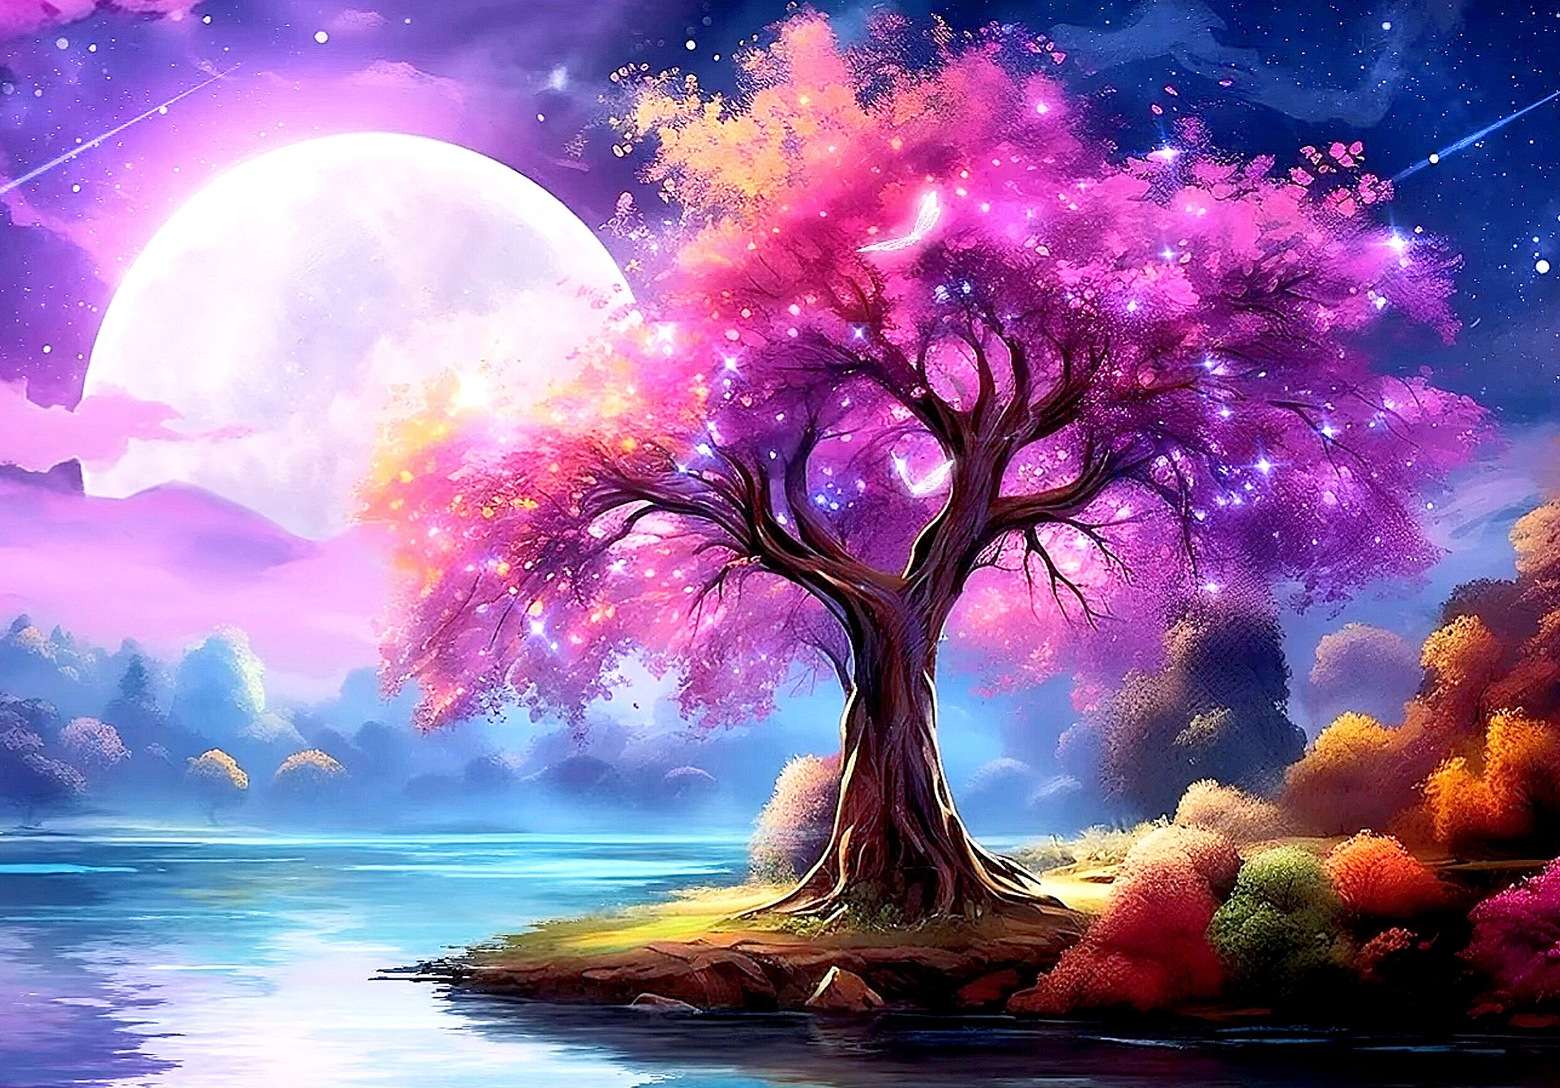 Trees by the lake (fantasy image) jigsaw puzzle online